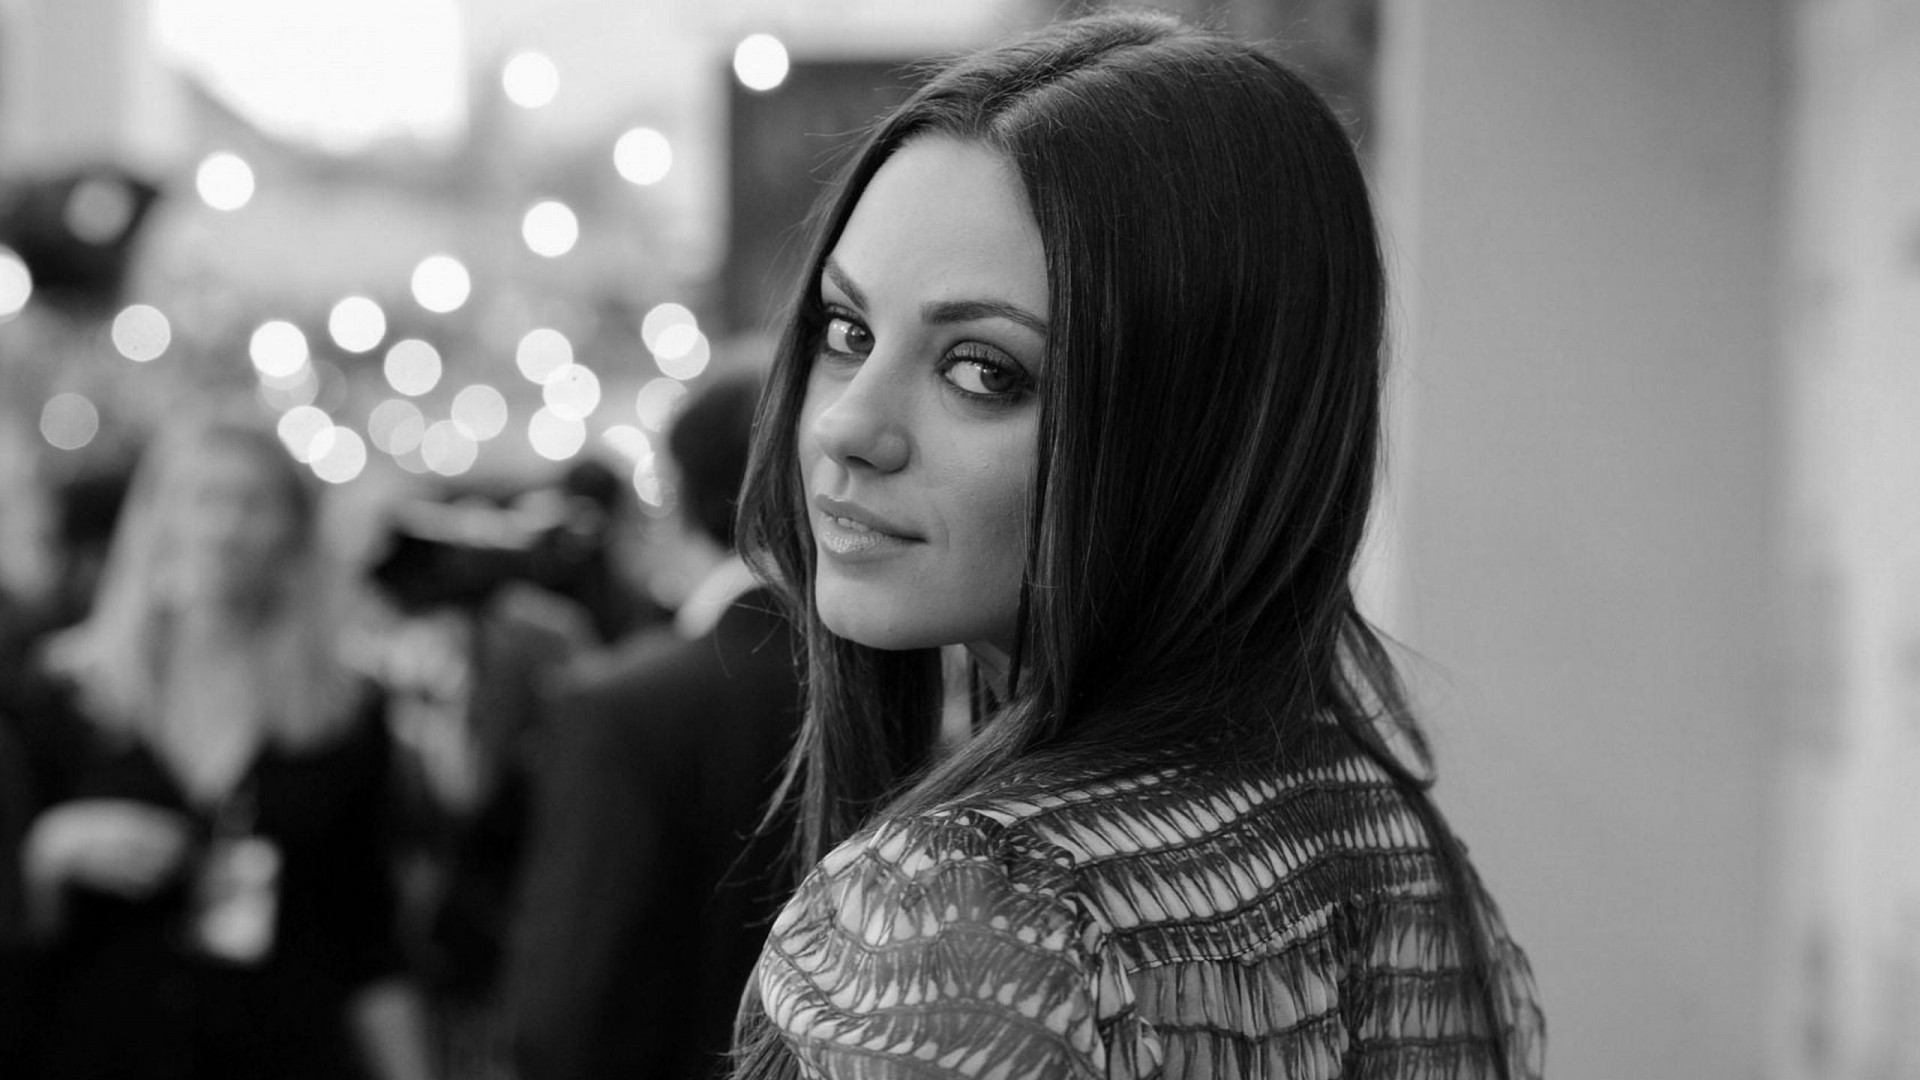 Mila Kunis Monochrome Hd Celebrities 4k Wallpapers Images Backgrounds Photos And Pictures